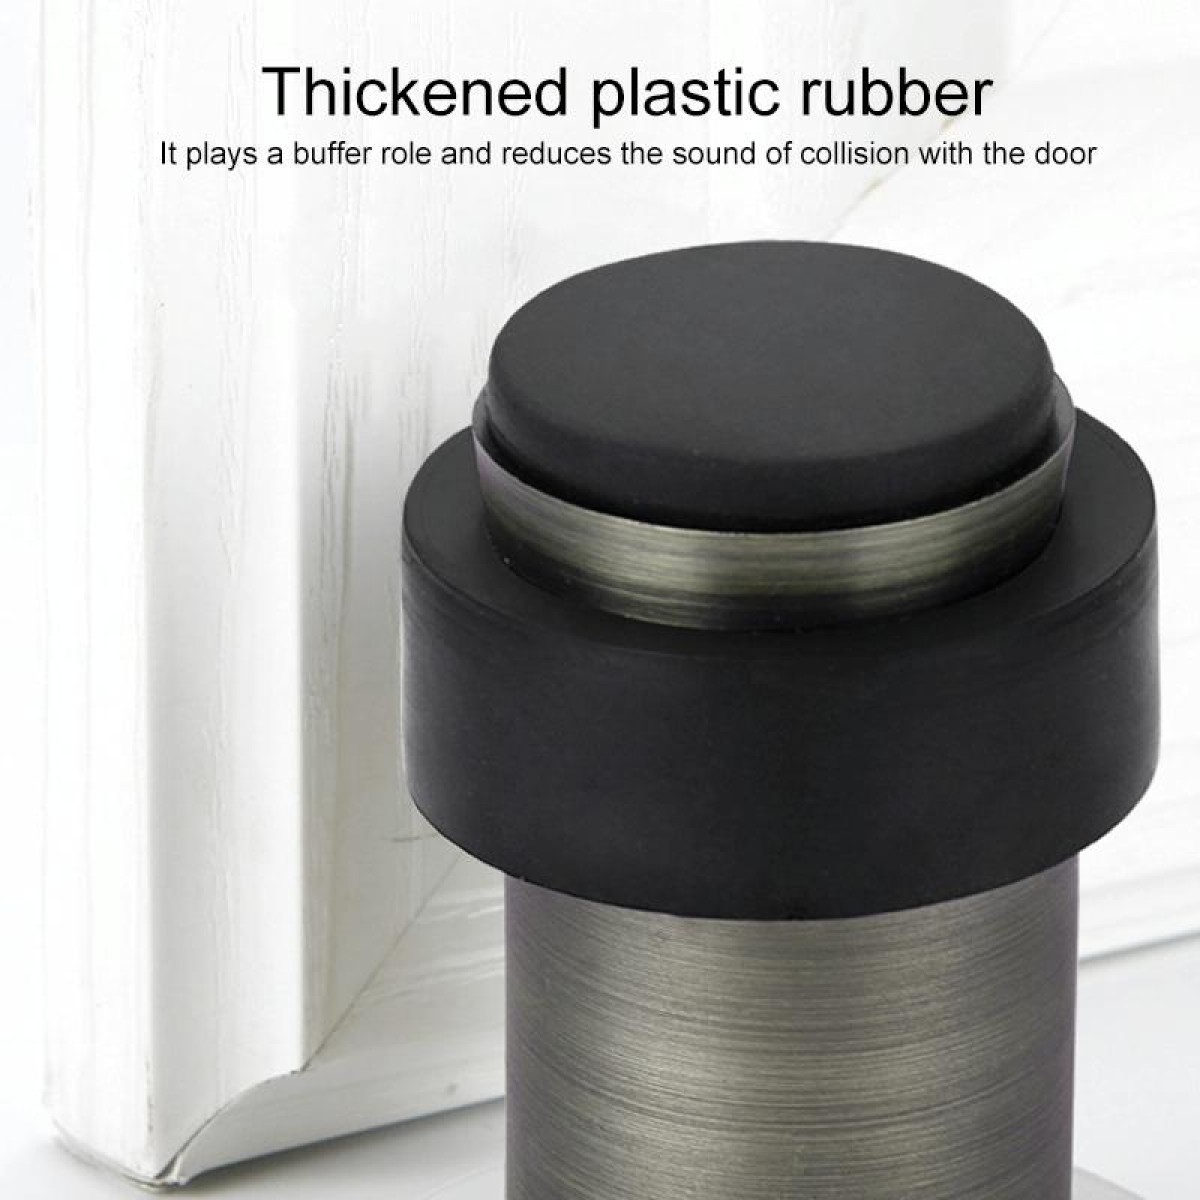 Rubber Anti-Collision Door Gear Punching Stainless Steel Round Door Resistant Home Floor-Shaped Cylindrical Door Touch, Specification: Golden 46mm With Plastic Head+Punch-free